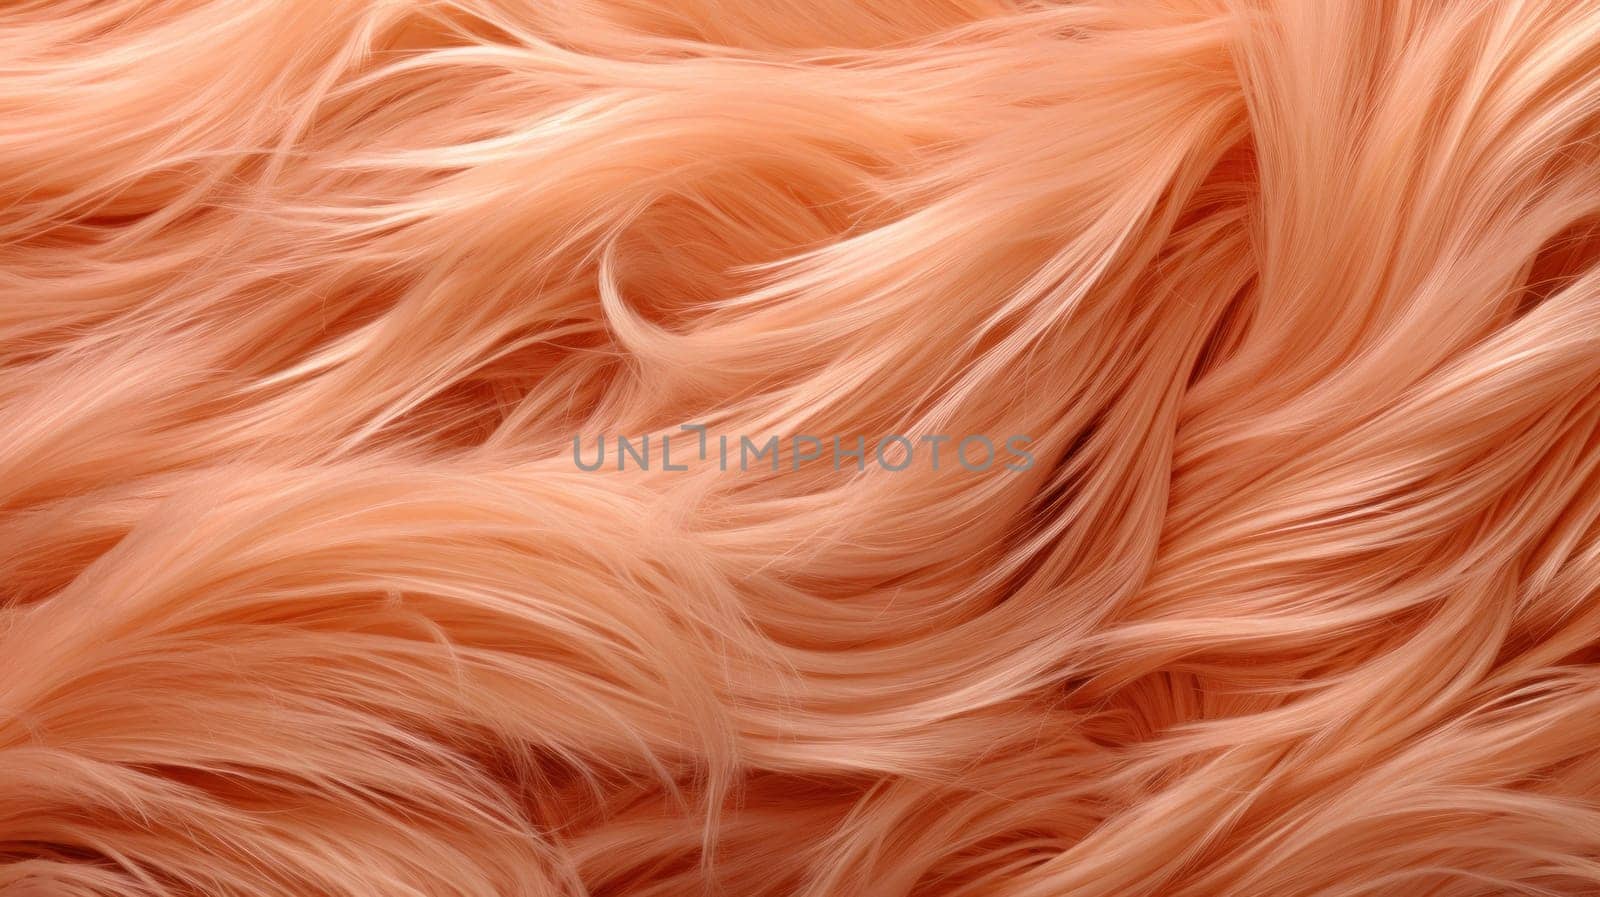 A close up of a fluffy orange colored hair